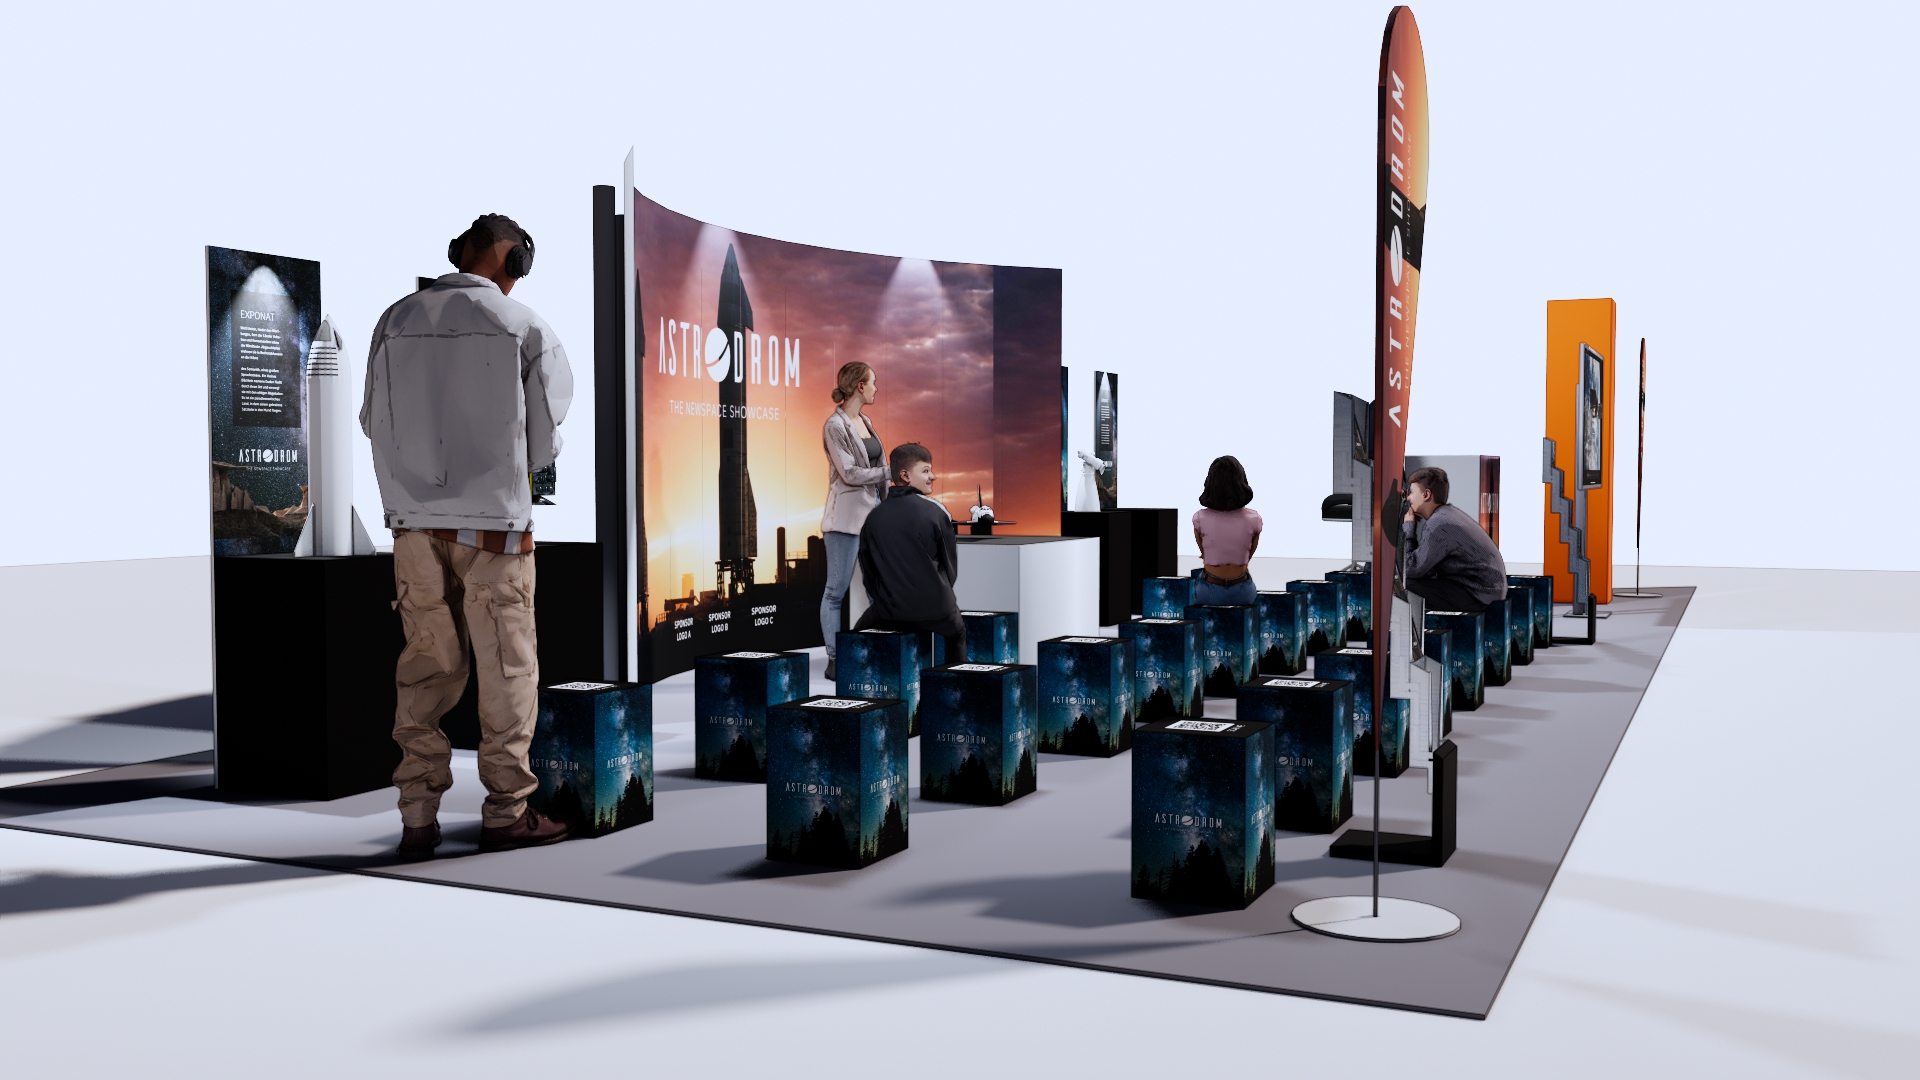 Note: Visualization and rendering of the booth is for illustrative purposes only. Graphics, exhibits and designs are subject to change.